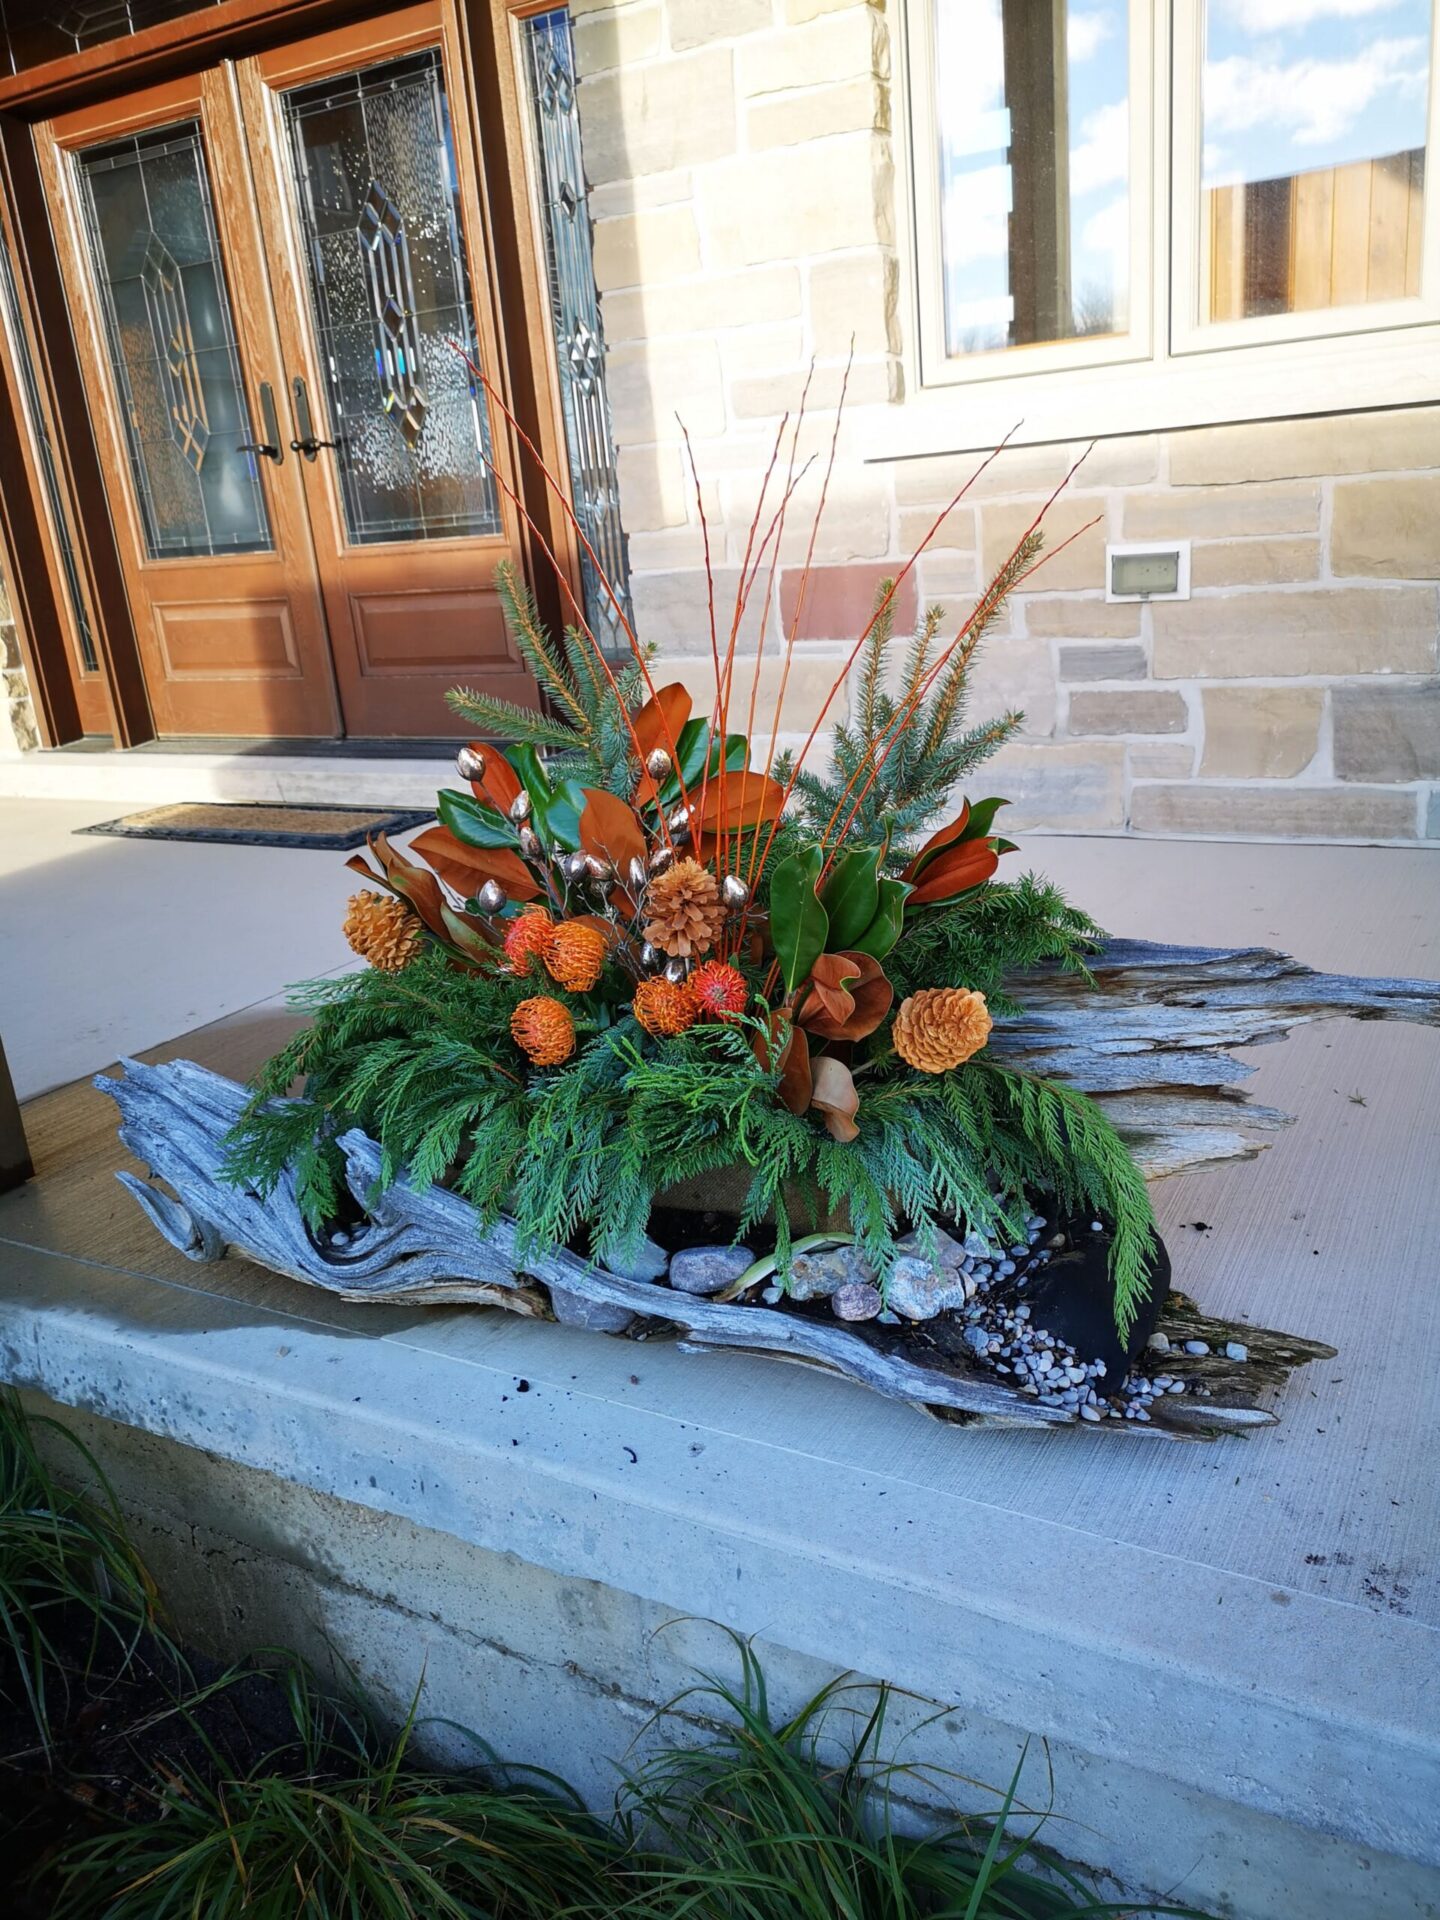 A festive floral arrangement on weathered wood, comprising orange blooms, pine cones, and evergreen foliage, placed on a residential entryway ledge.